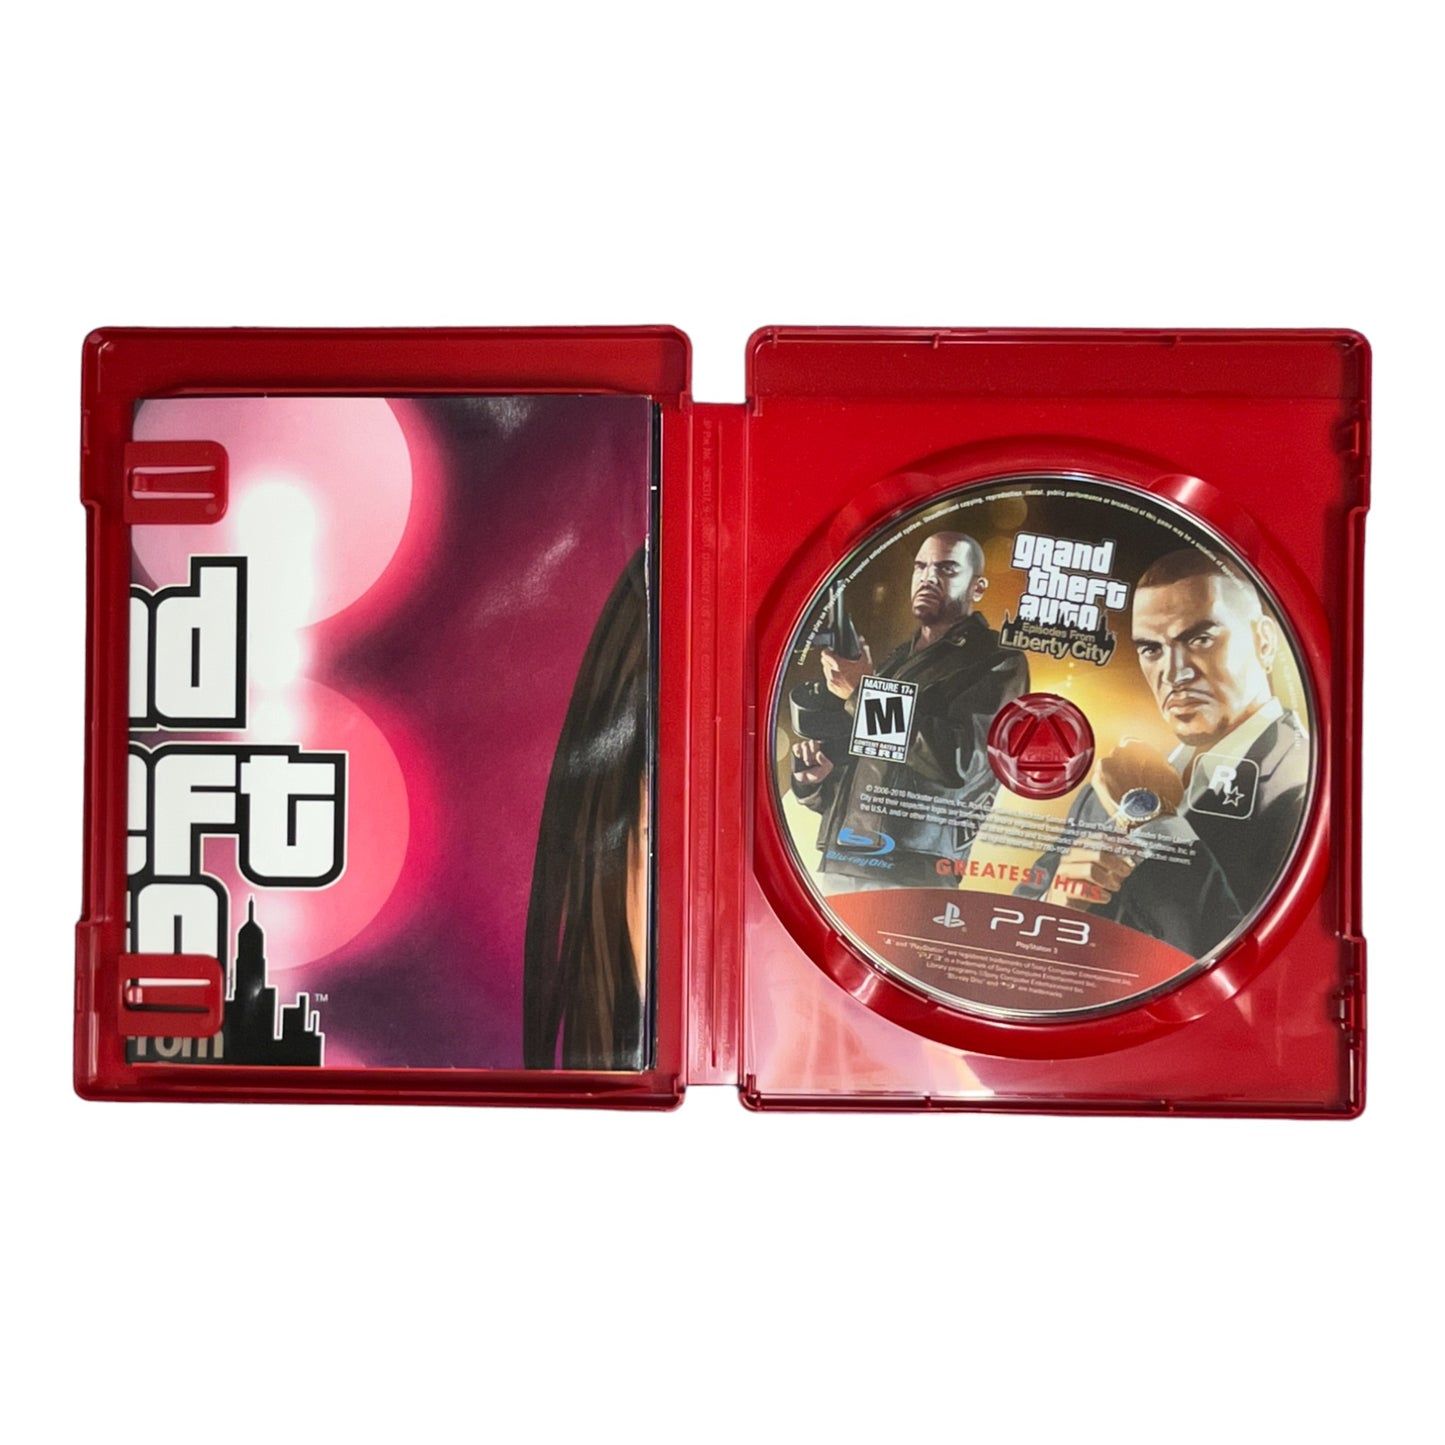 Grand Theft Auto: Episodes From Liberty City (PS3)